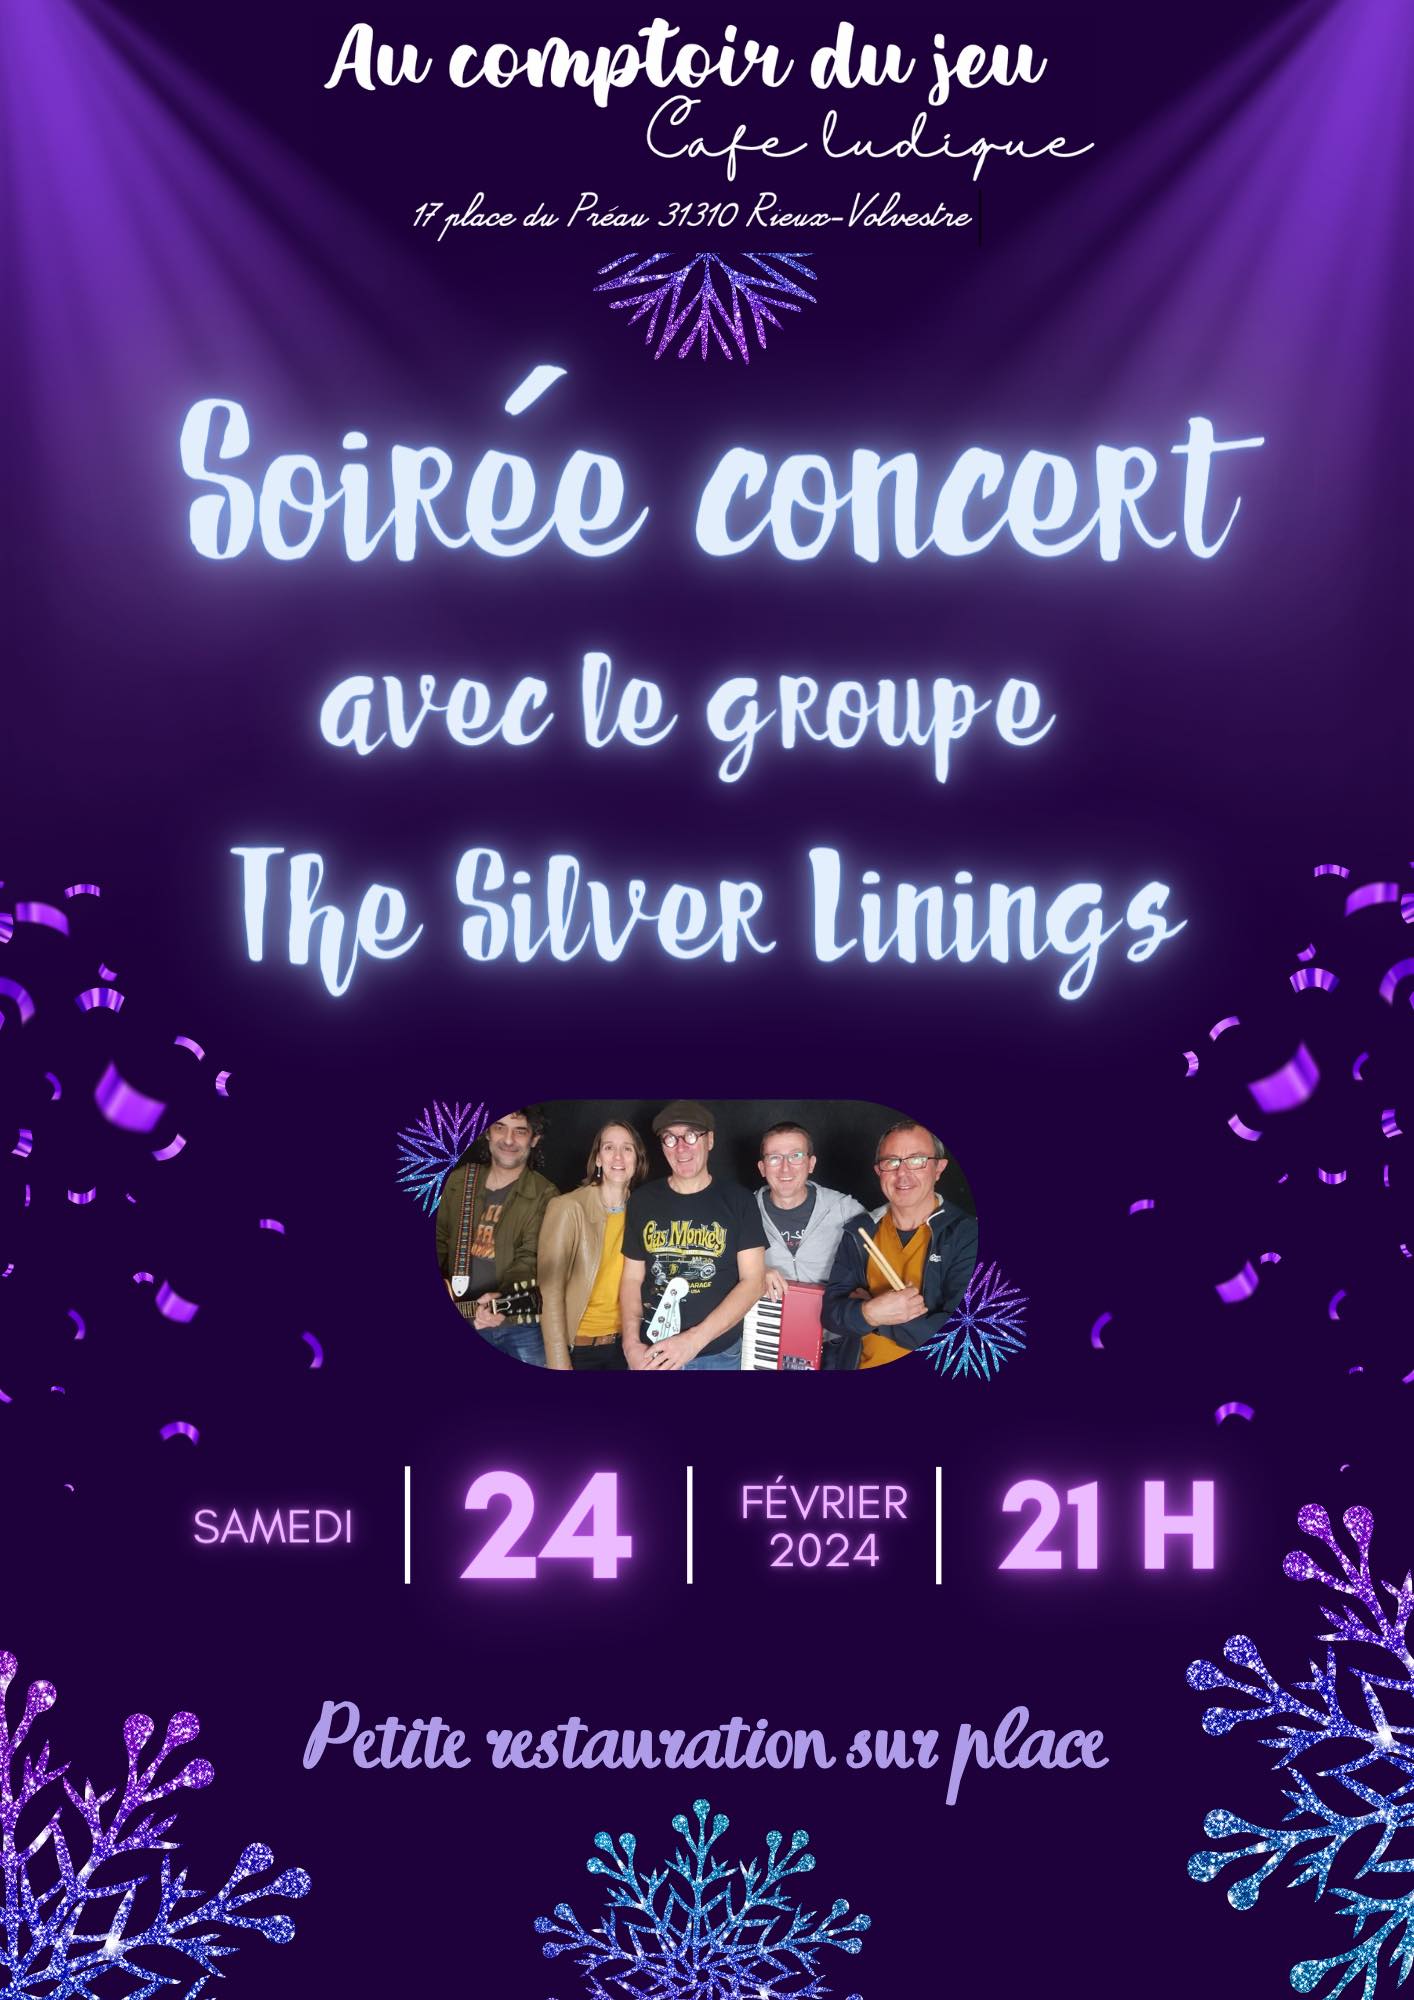 SOIREE CONCERT AVEC THE SILVER LININGS